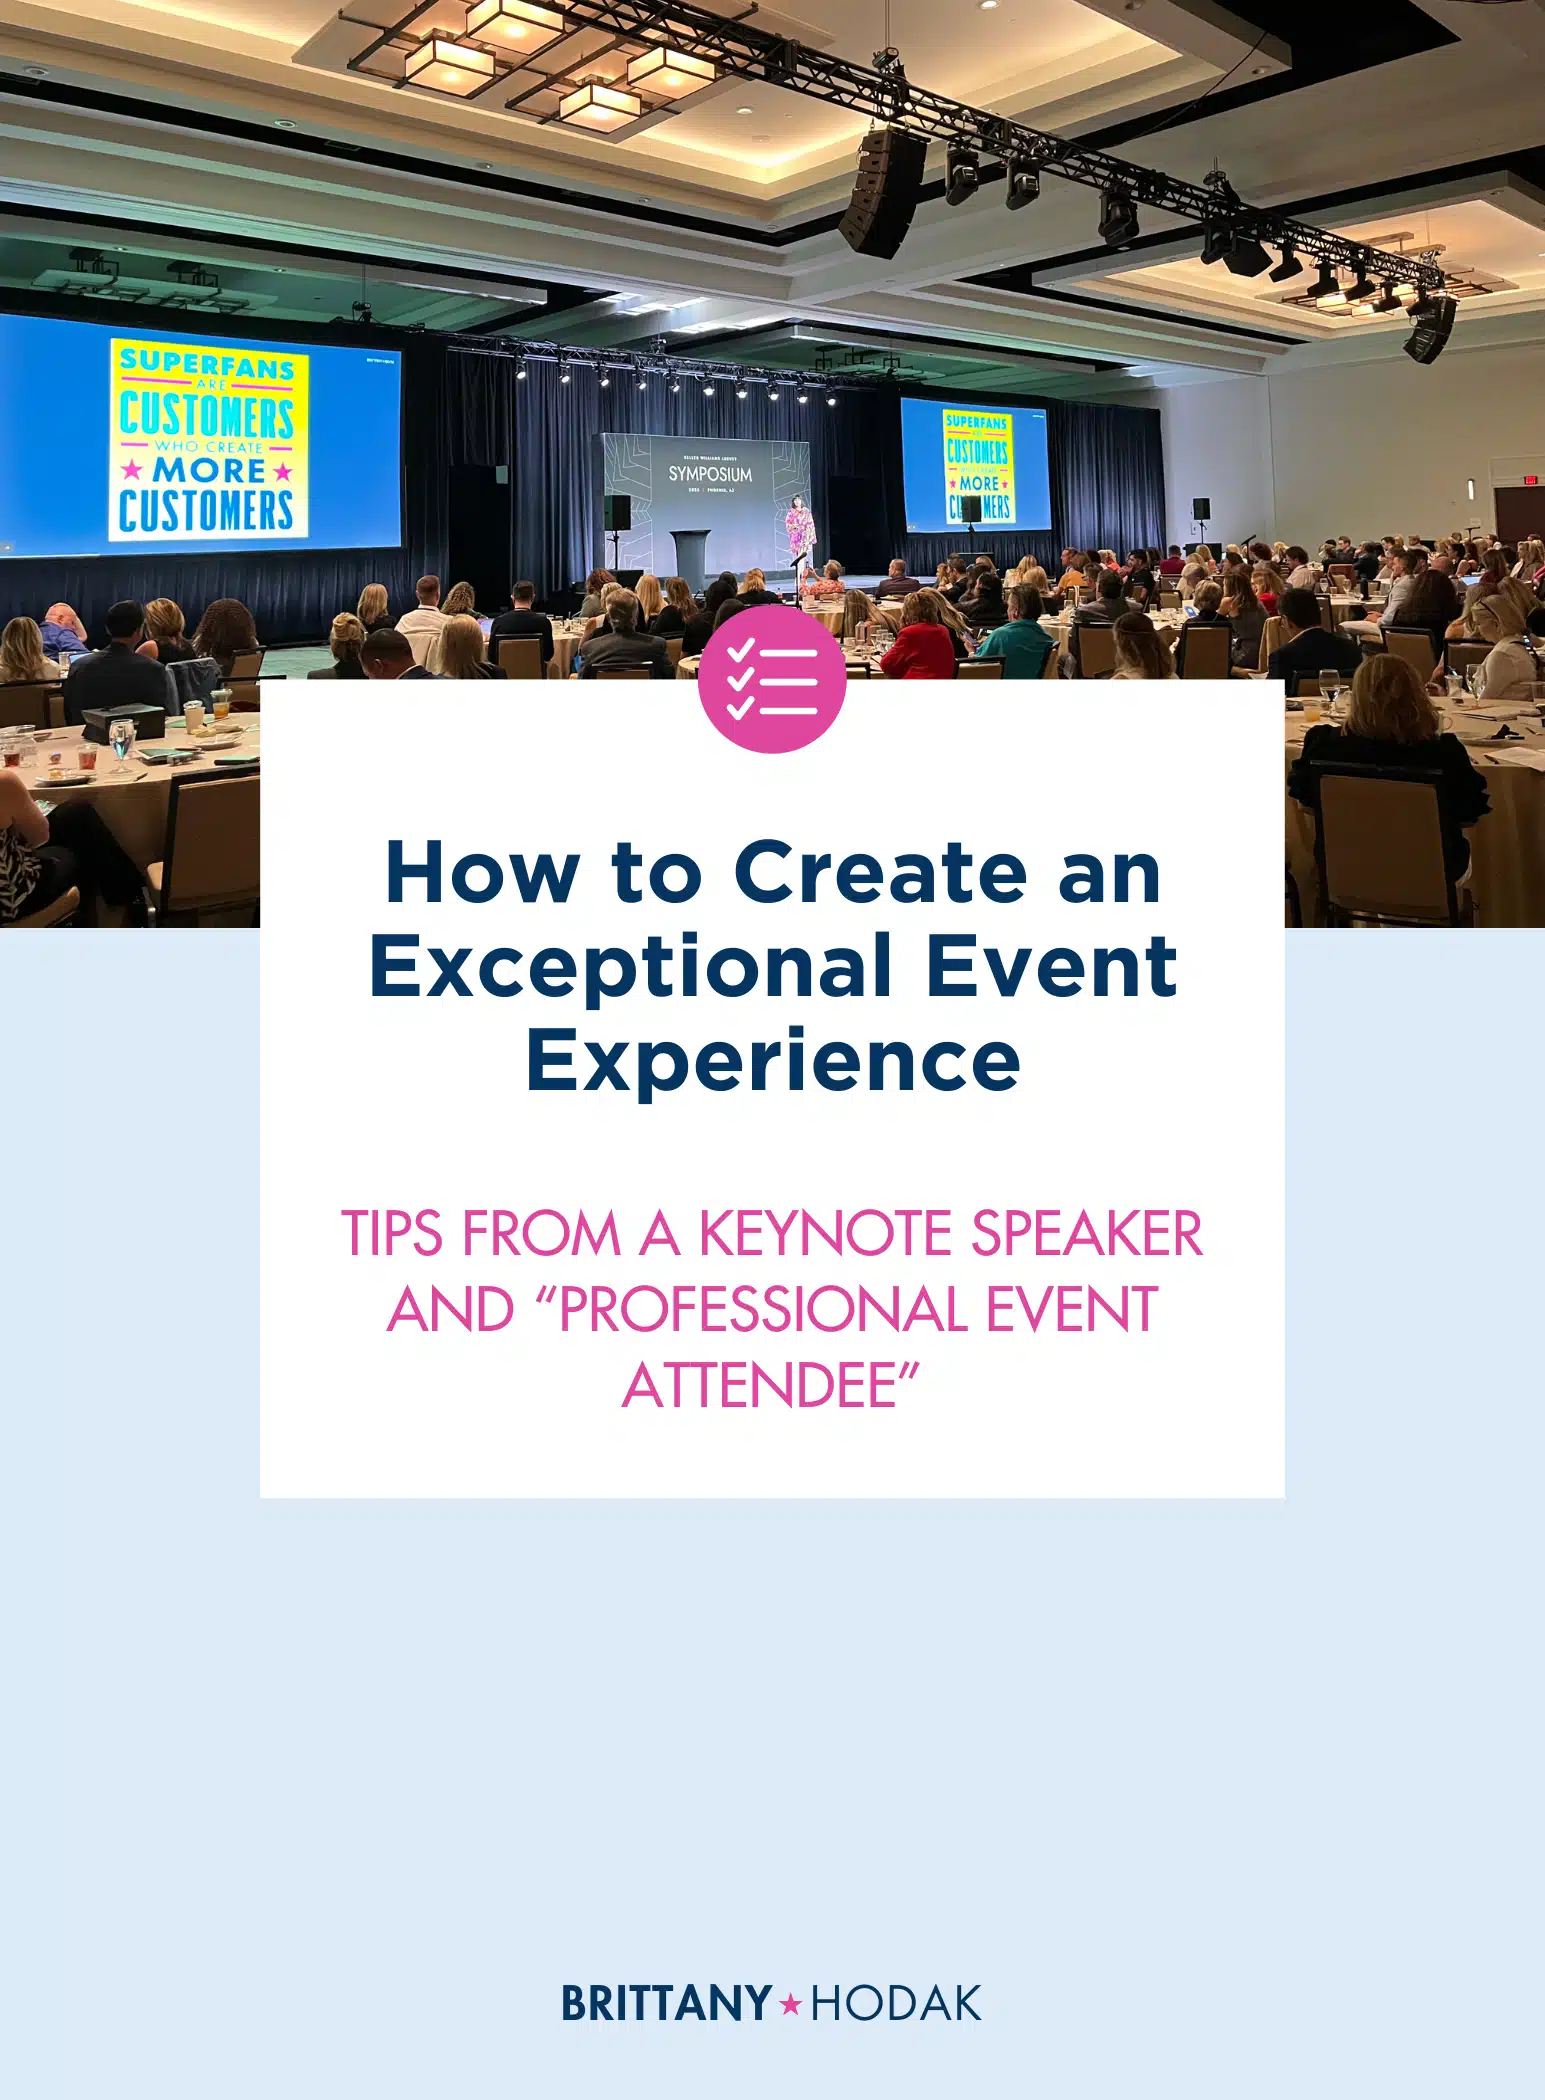 How To Create An Exceptional Event Experience - Brittany Hodak